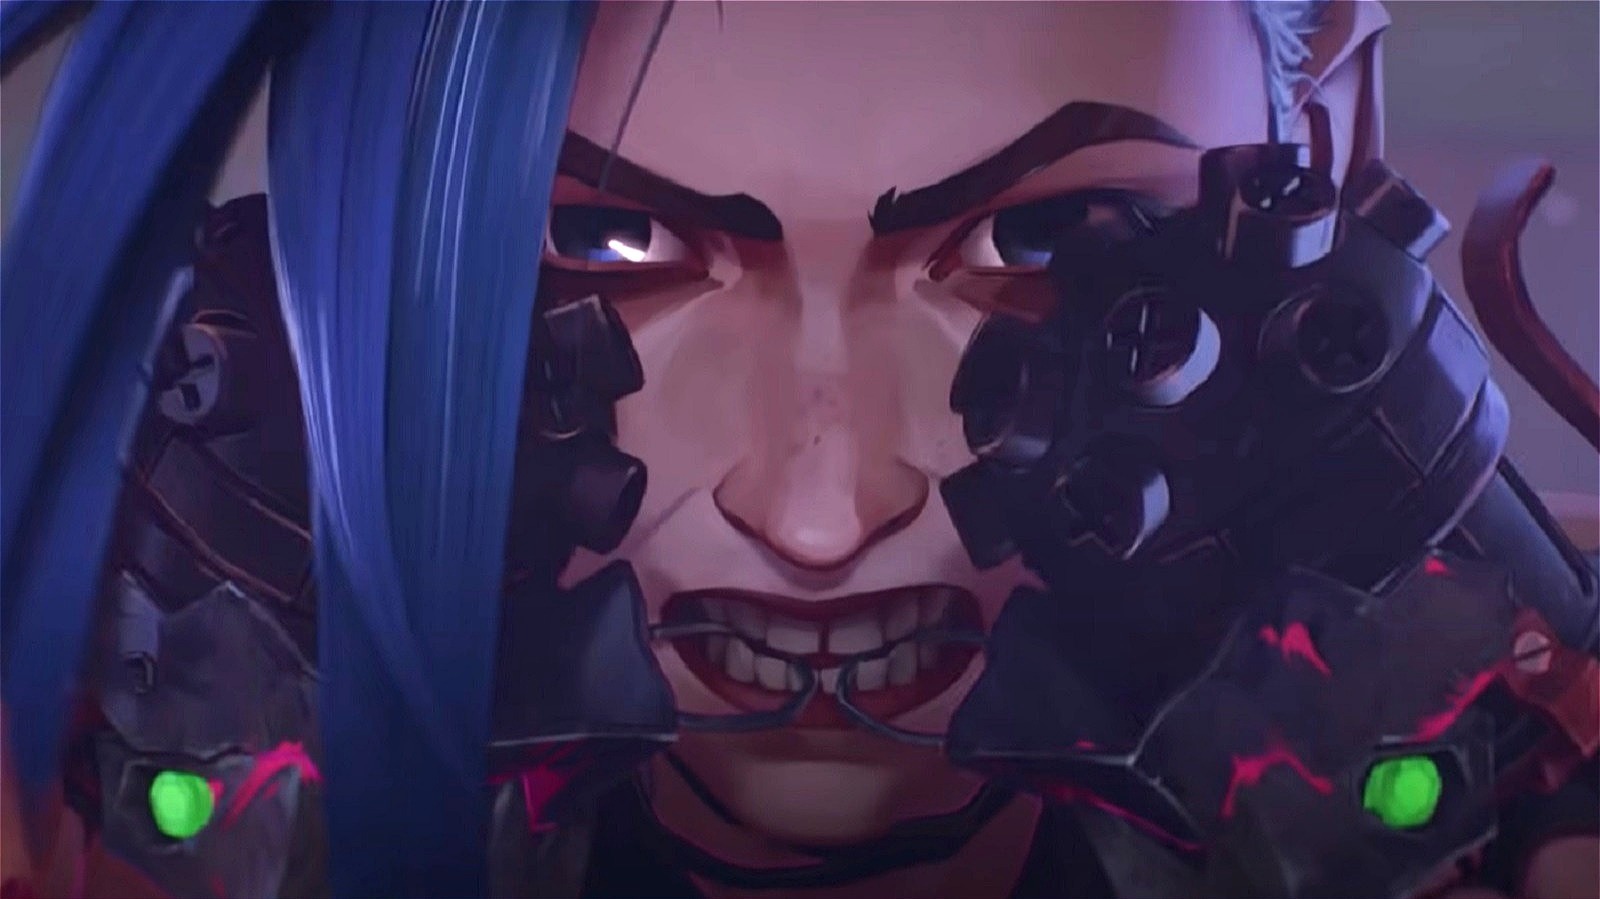 Arcane' creators explain why Jinx and Vi are the stars of the Netflix series